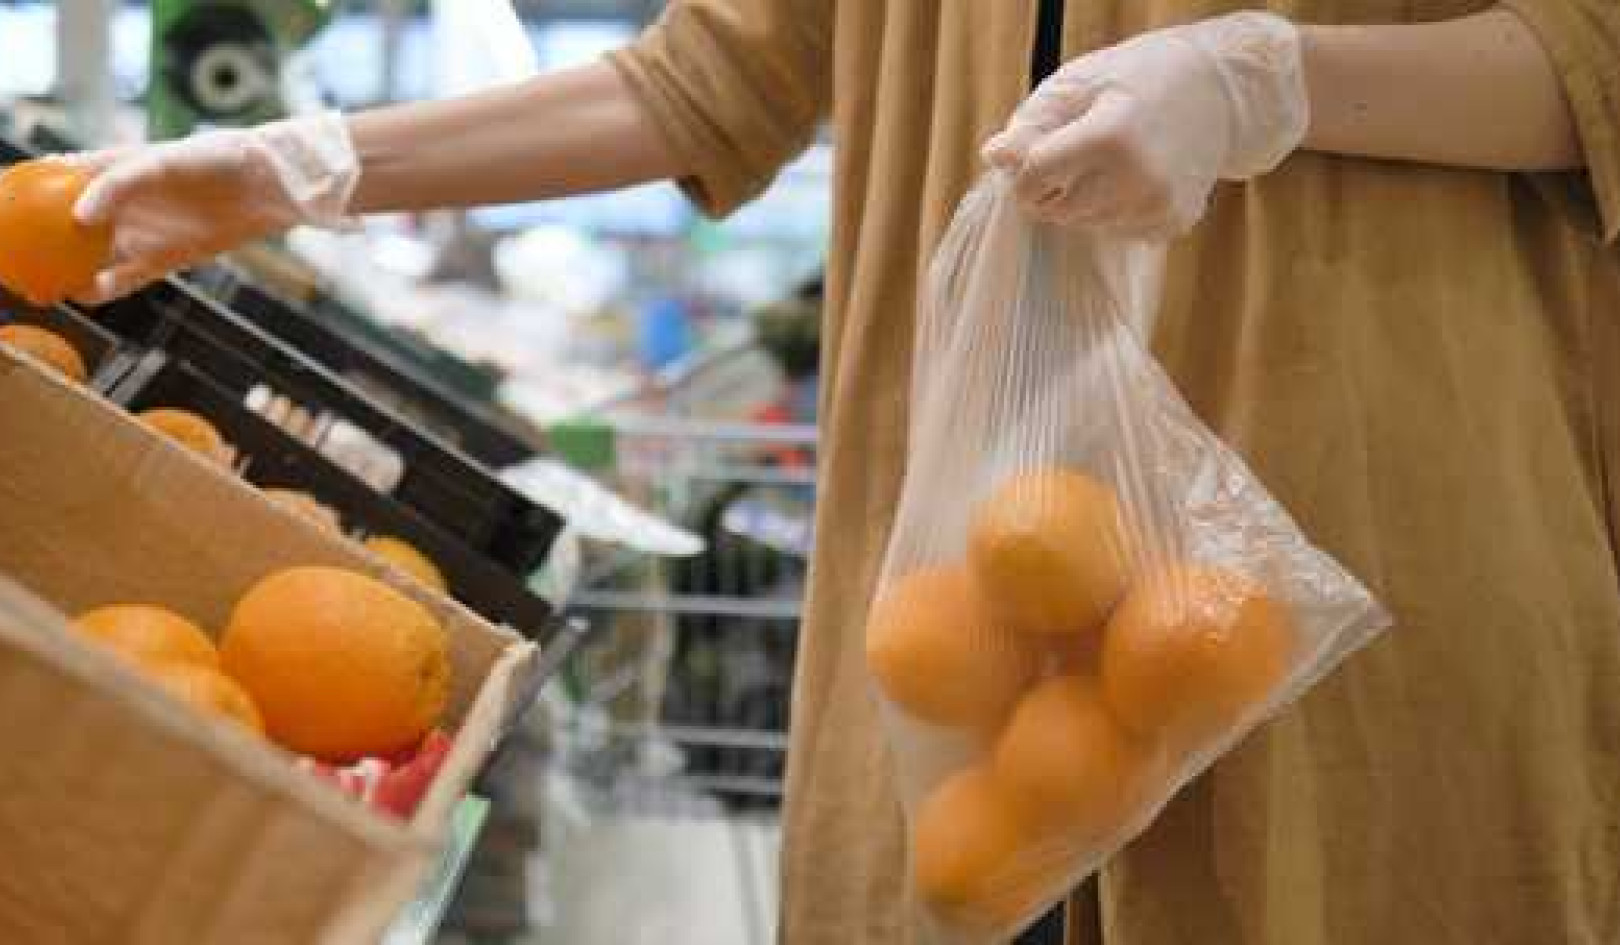 Why Some People Are Deliberately Spitting, Coughing And Licking Food In Supermarkets